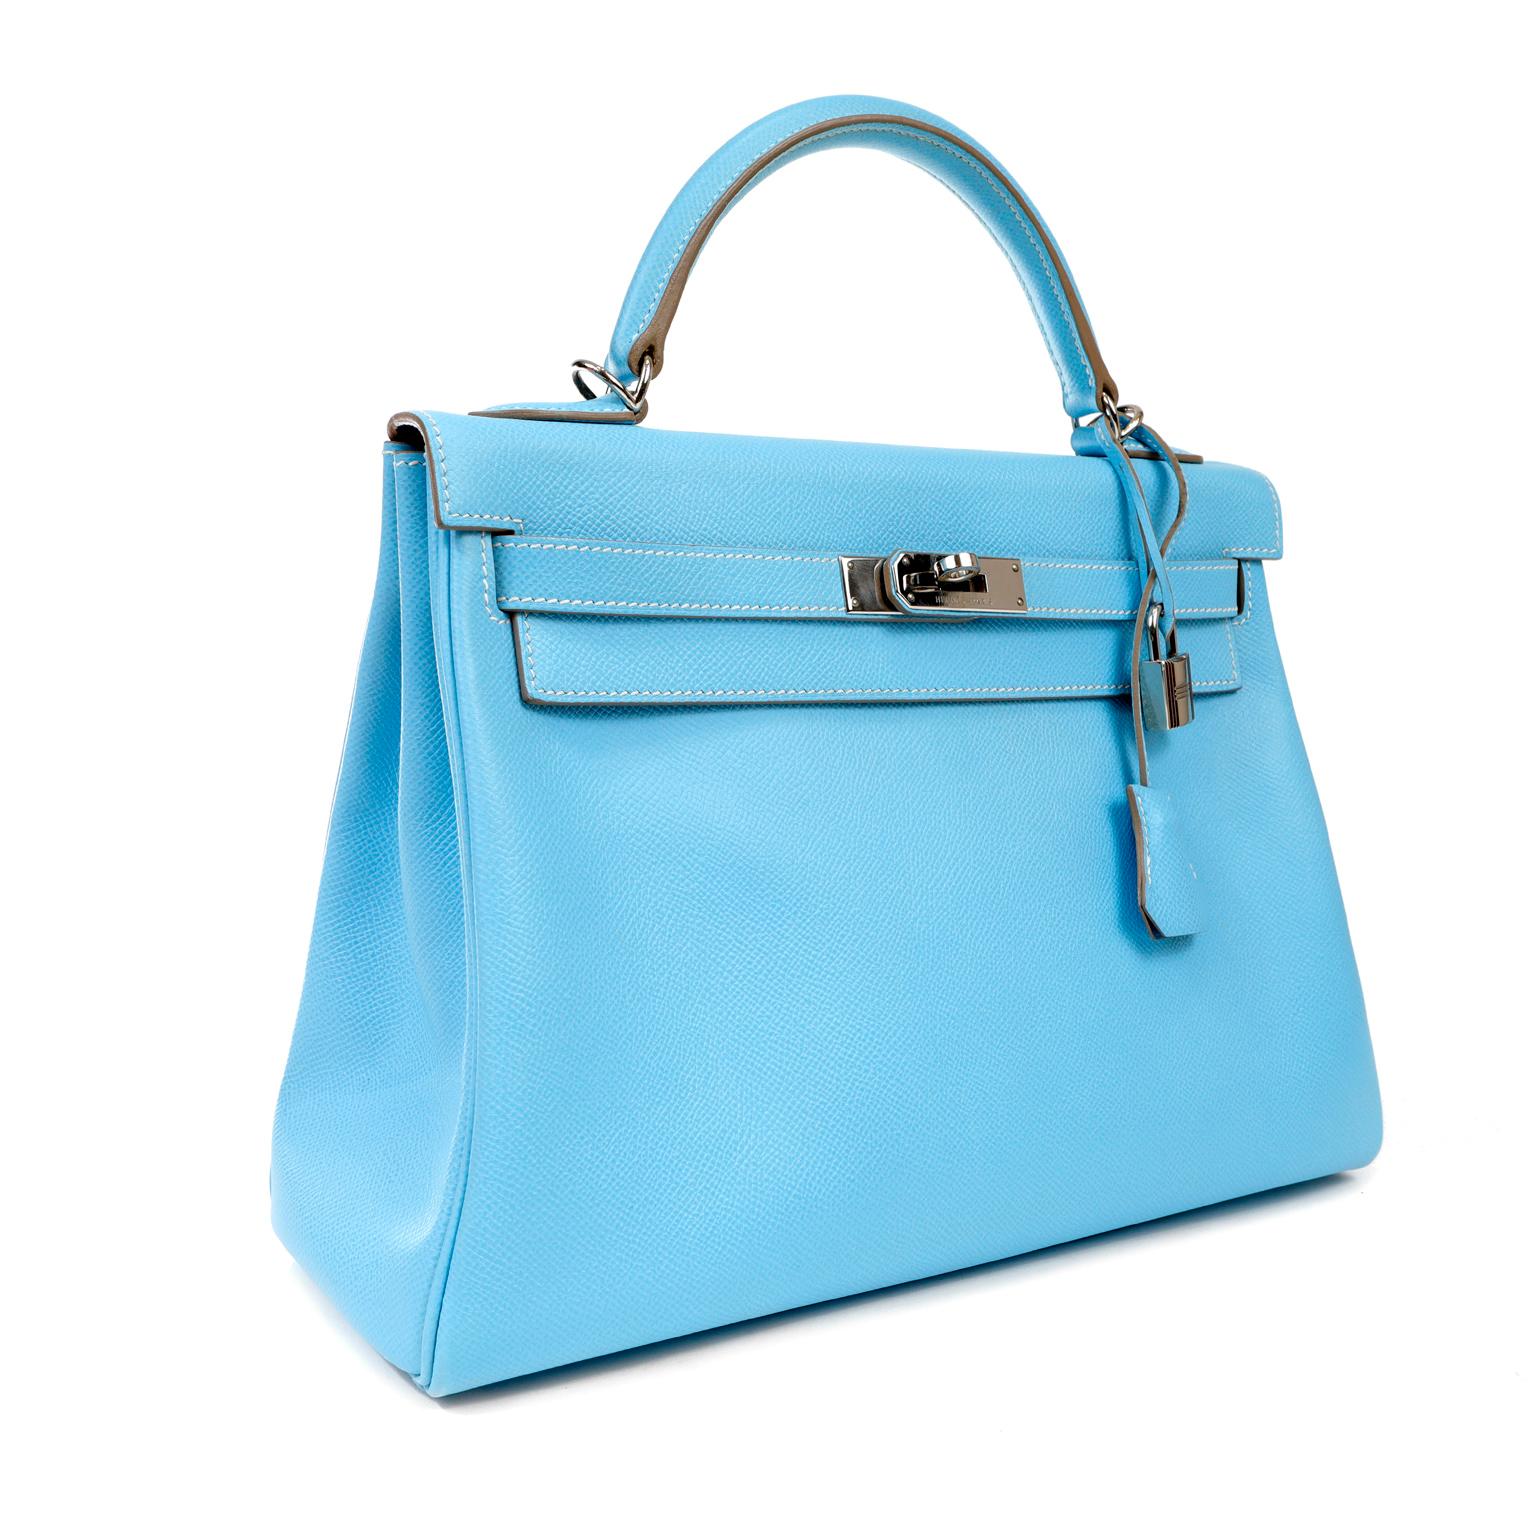 This authentic Hermès Sky Blue Epsom 32 cm Kelly is in excellent condition.     Hermès bags are considered the ultimate luxury item worldwide.  Each piece is handcrafted with waitlists that frequently exceed a year. The ladylike Kelly is classic and